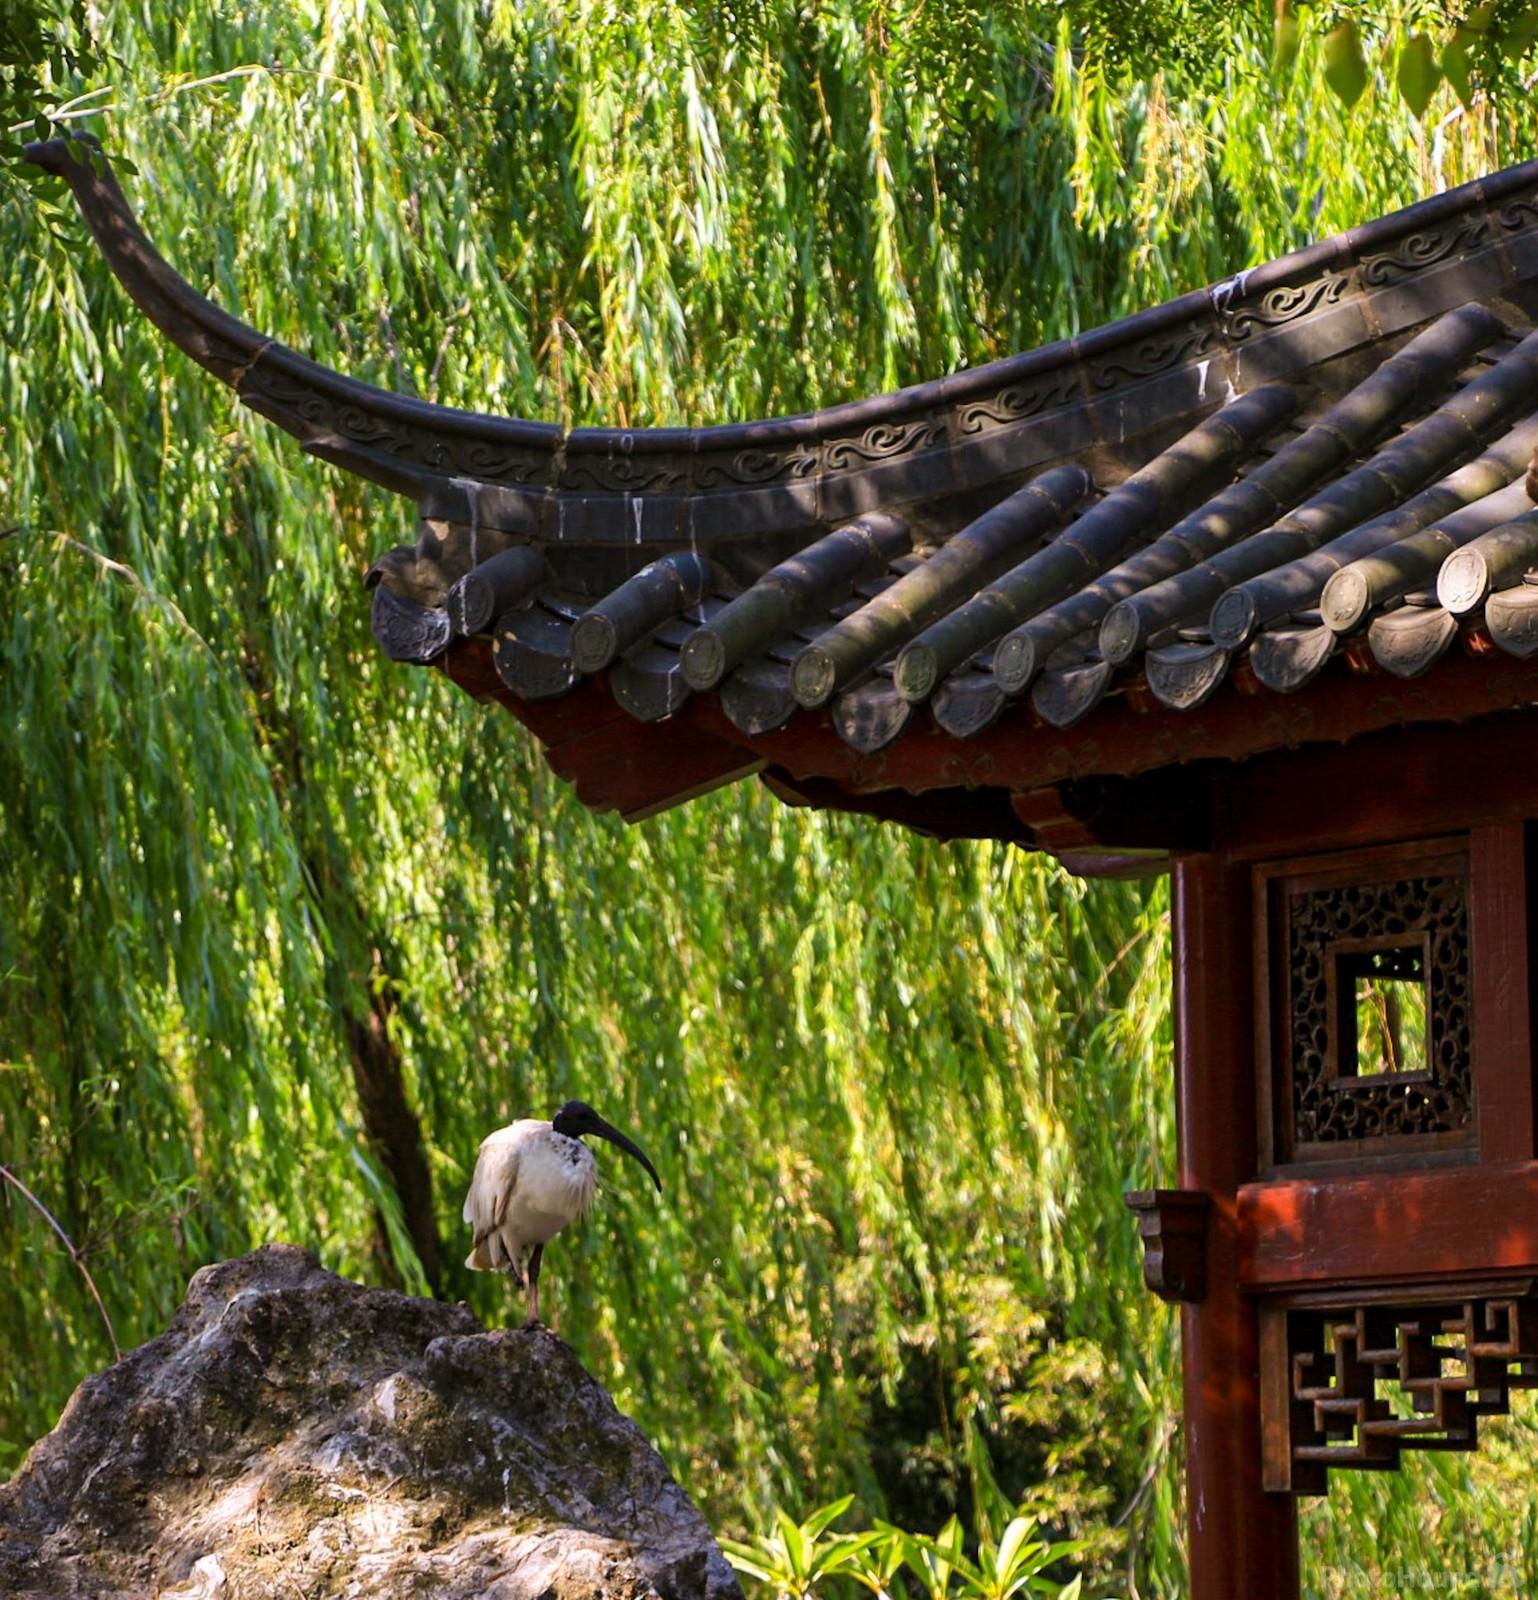 Image of Chinese Garden of Friendship by James Stevens